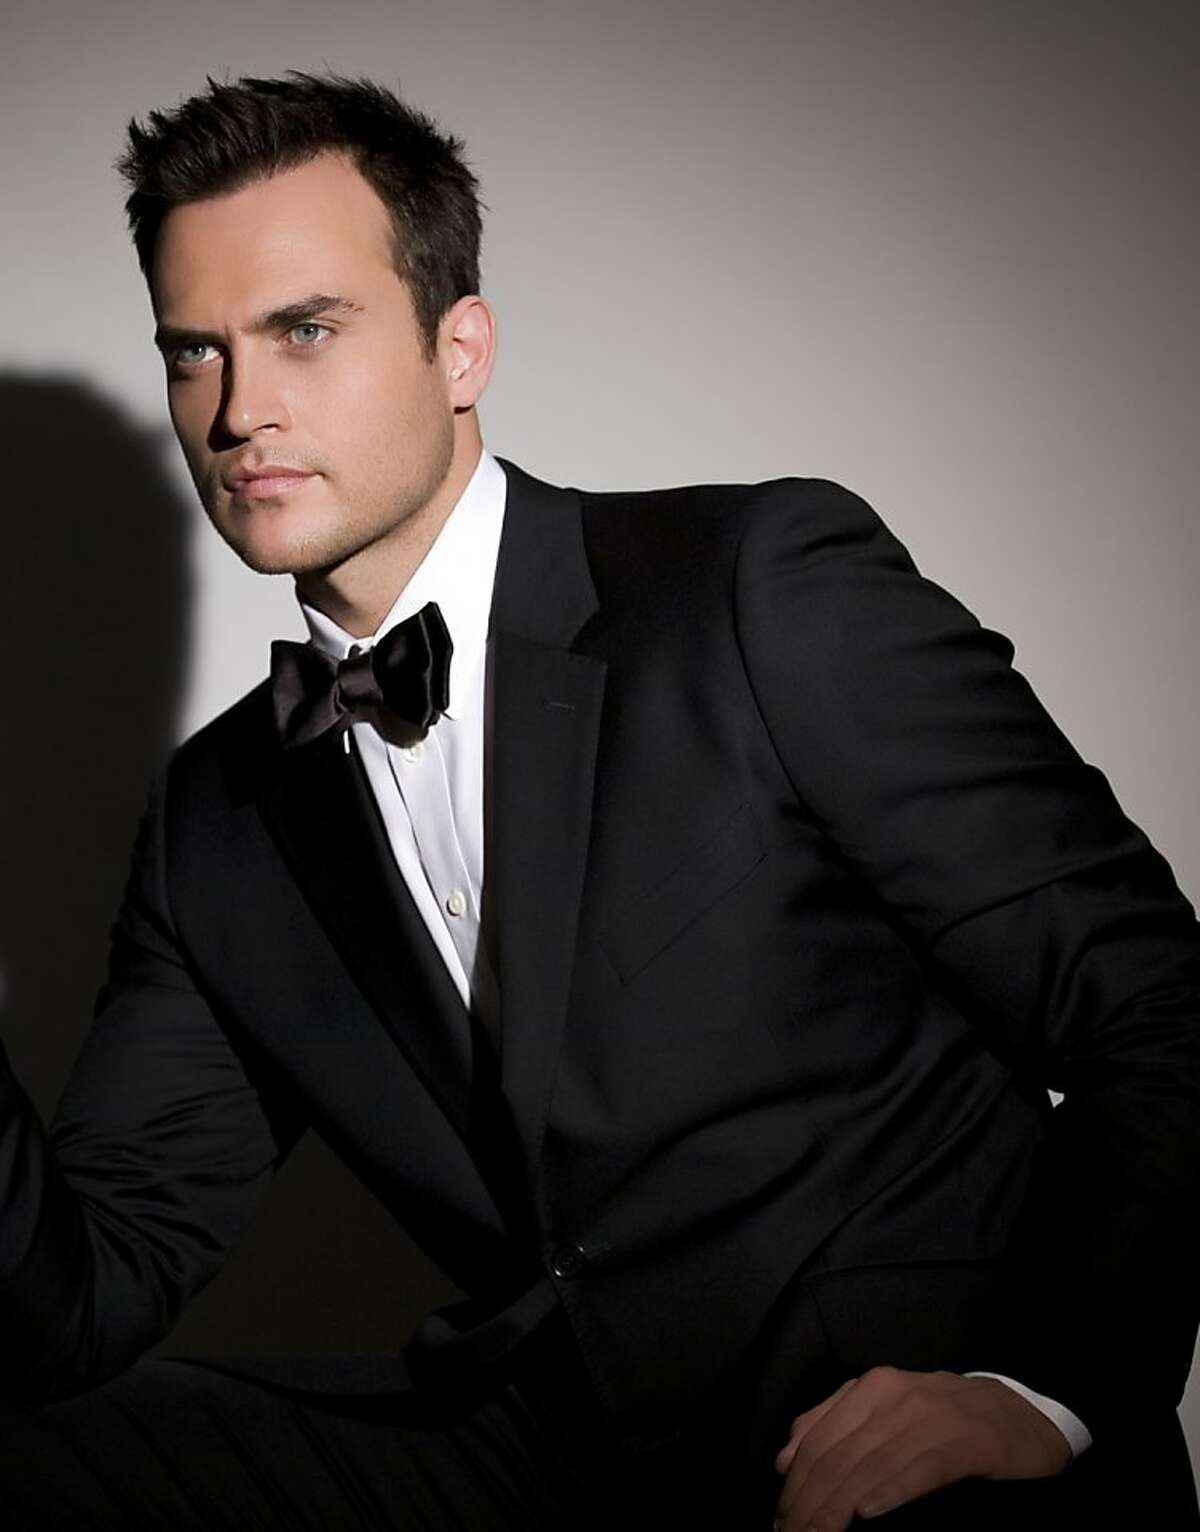 Cheyenne Jackson sings the role of Tony in San Francisco Symphony's concert of "West Side Story" through July 2. Photo courtesy of Cheyenne Jackson